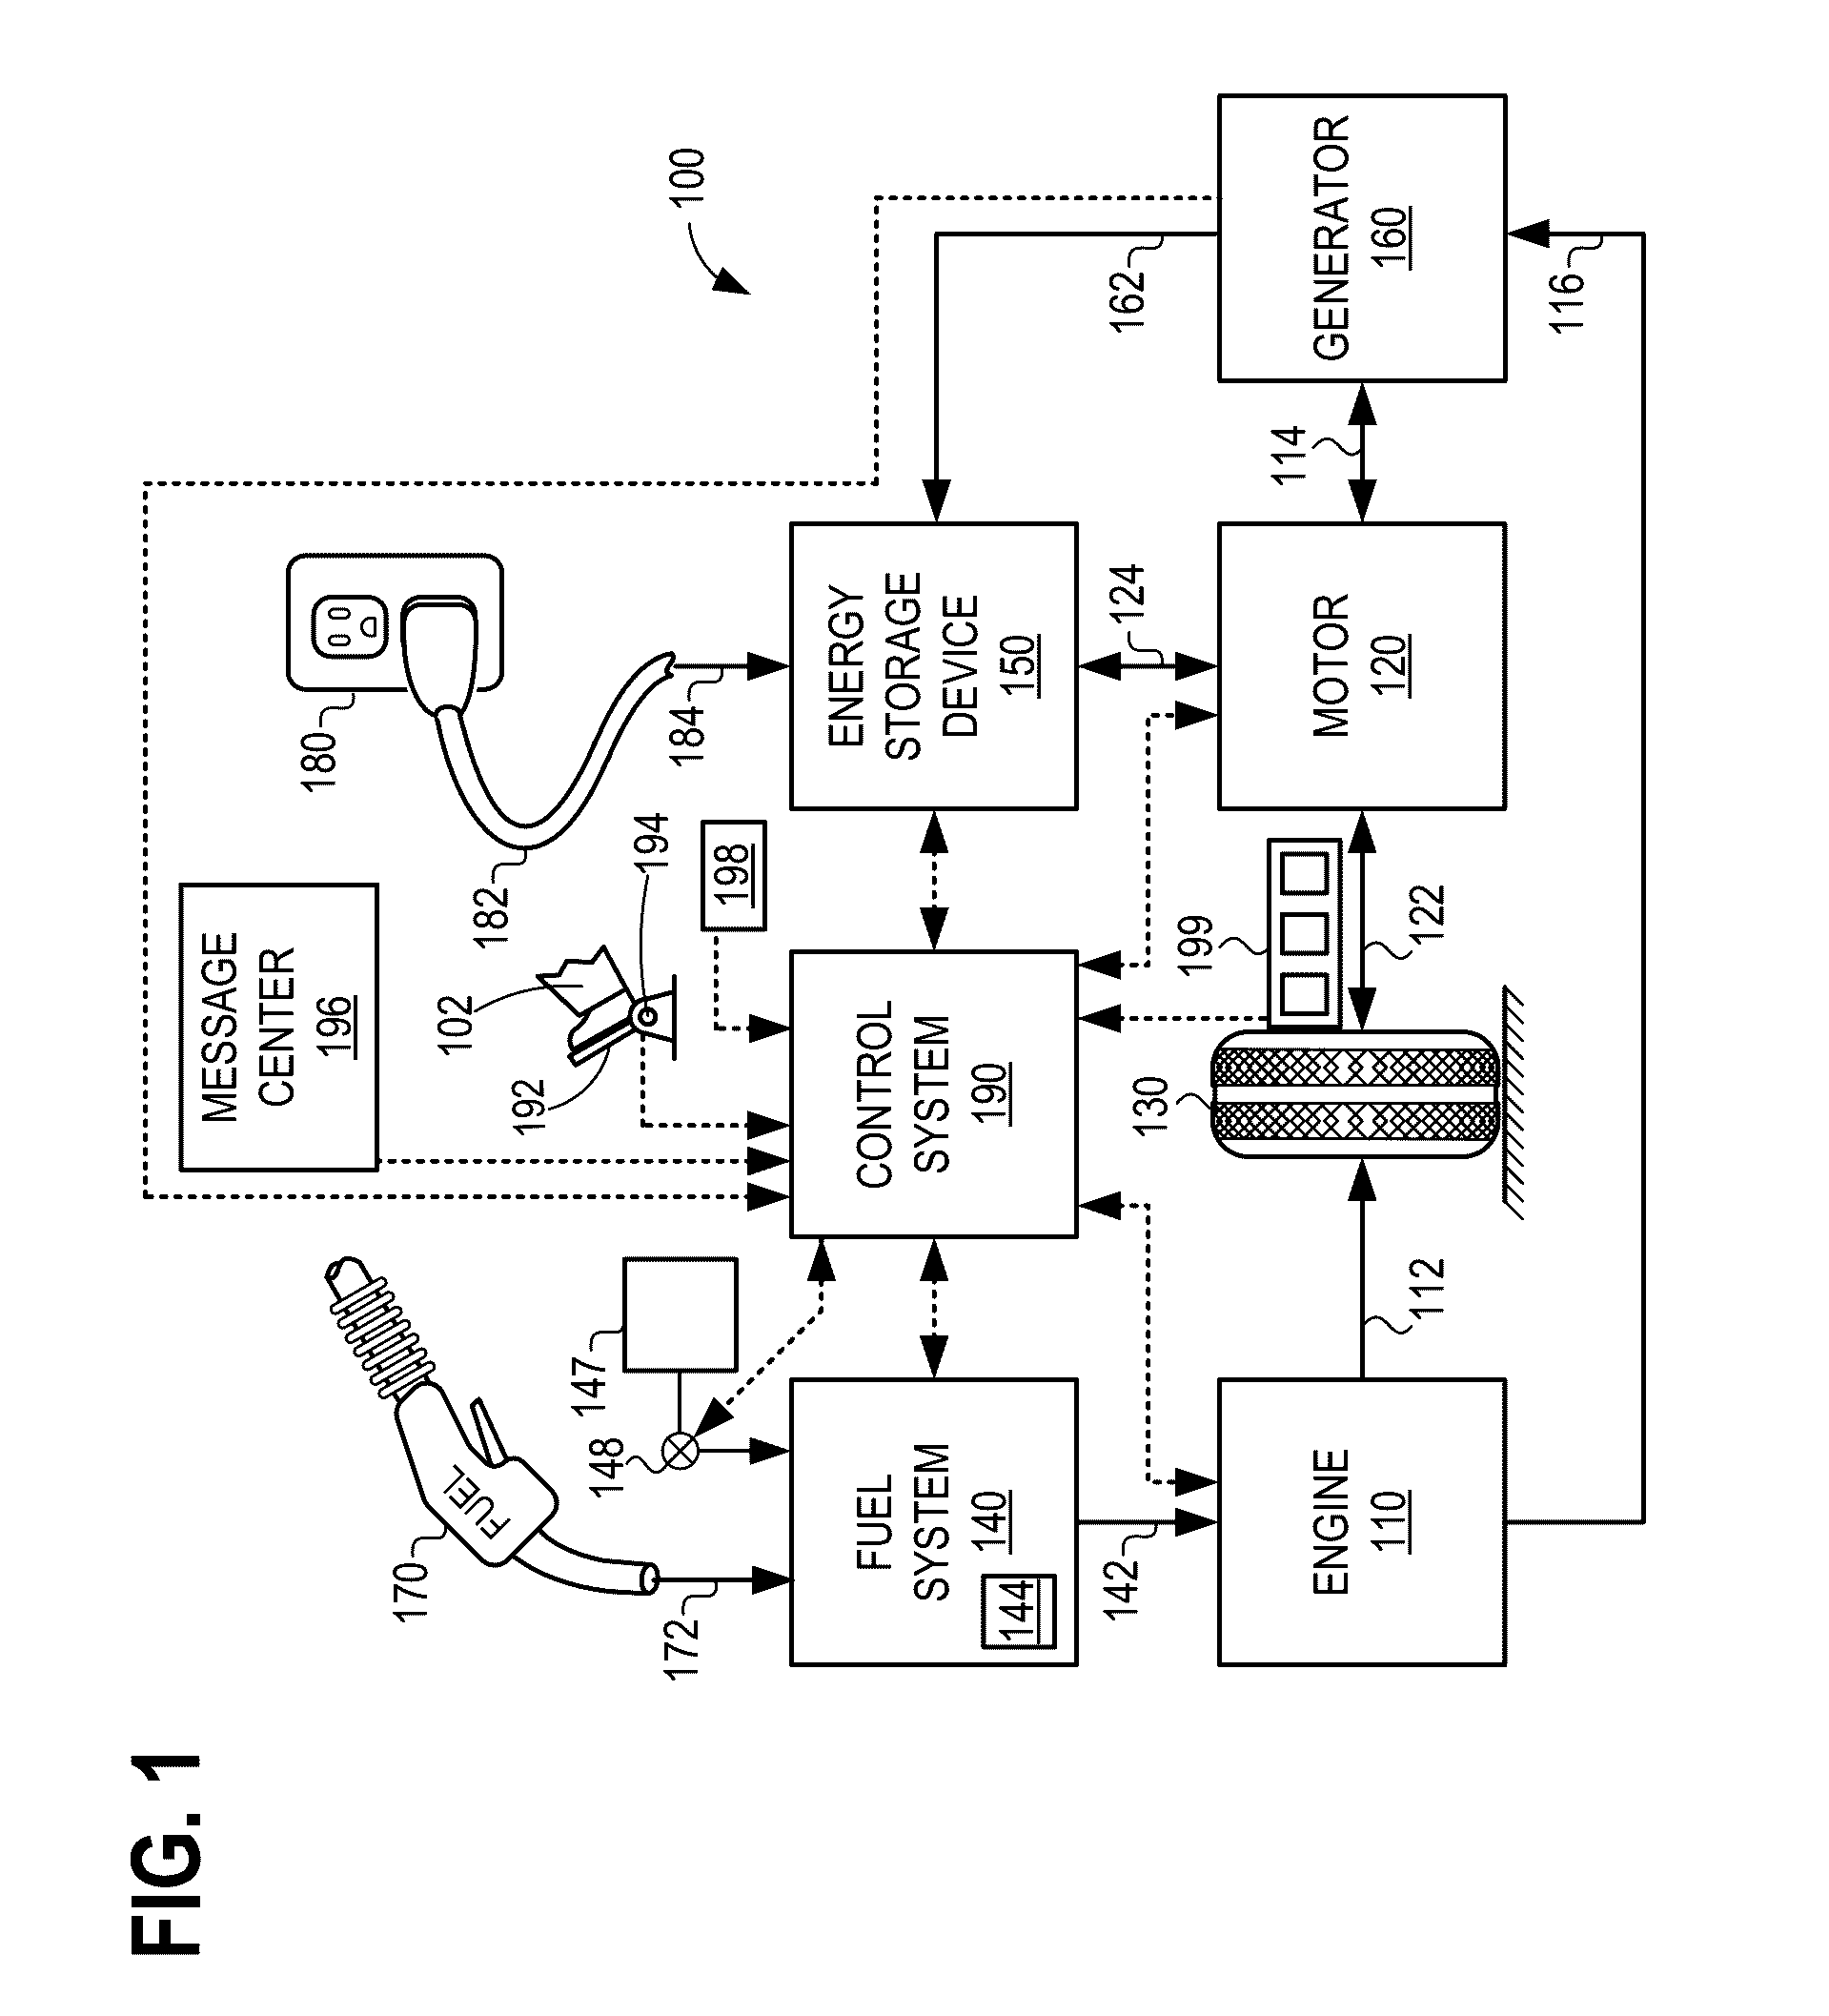 System and methods for reducing particulate matter emissions